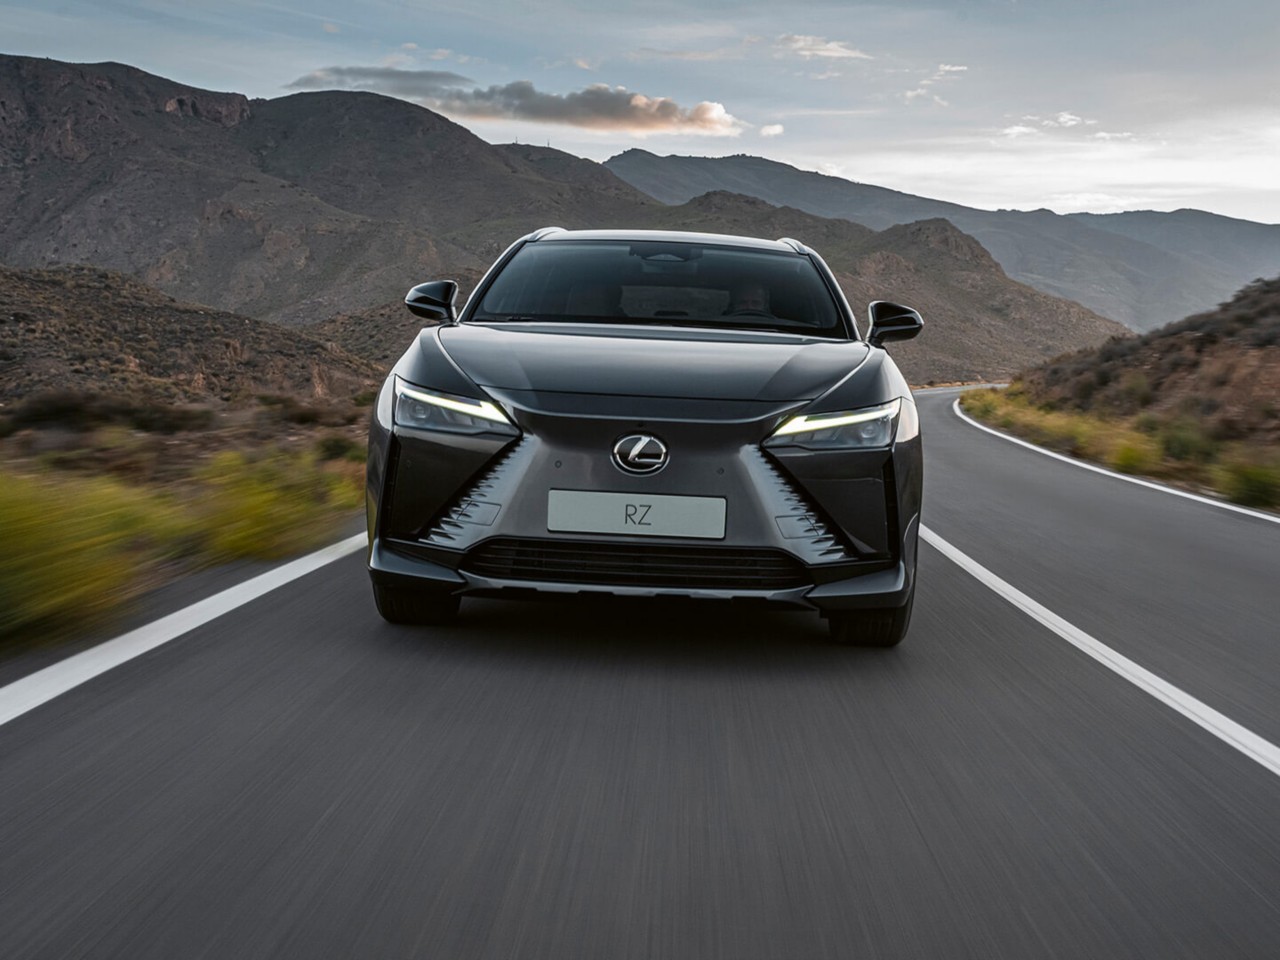 Front view of a Lexus RZ driving in a rural environment 